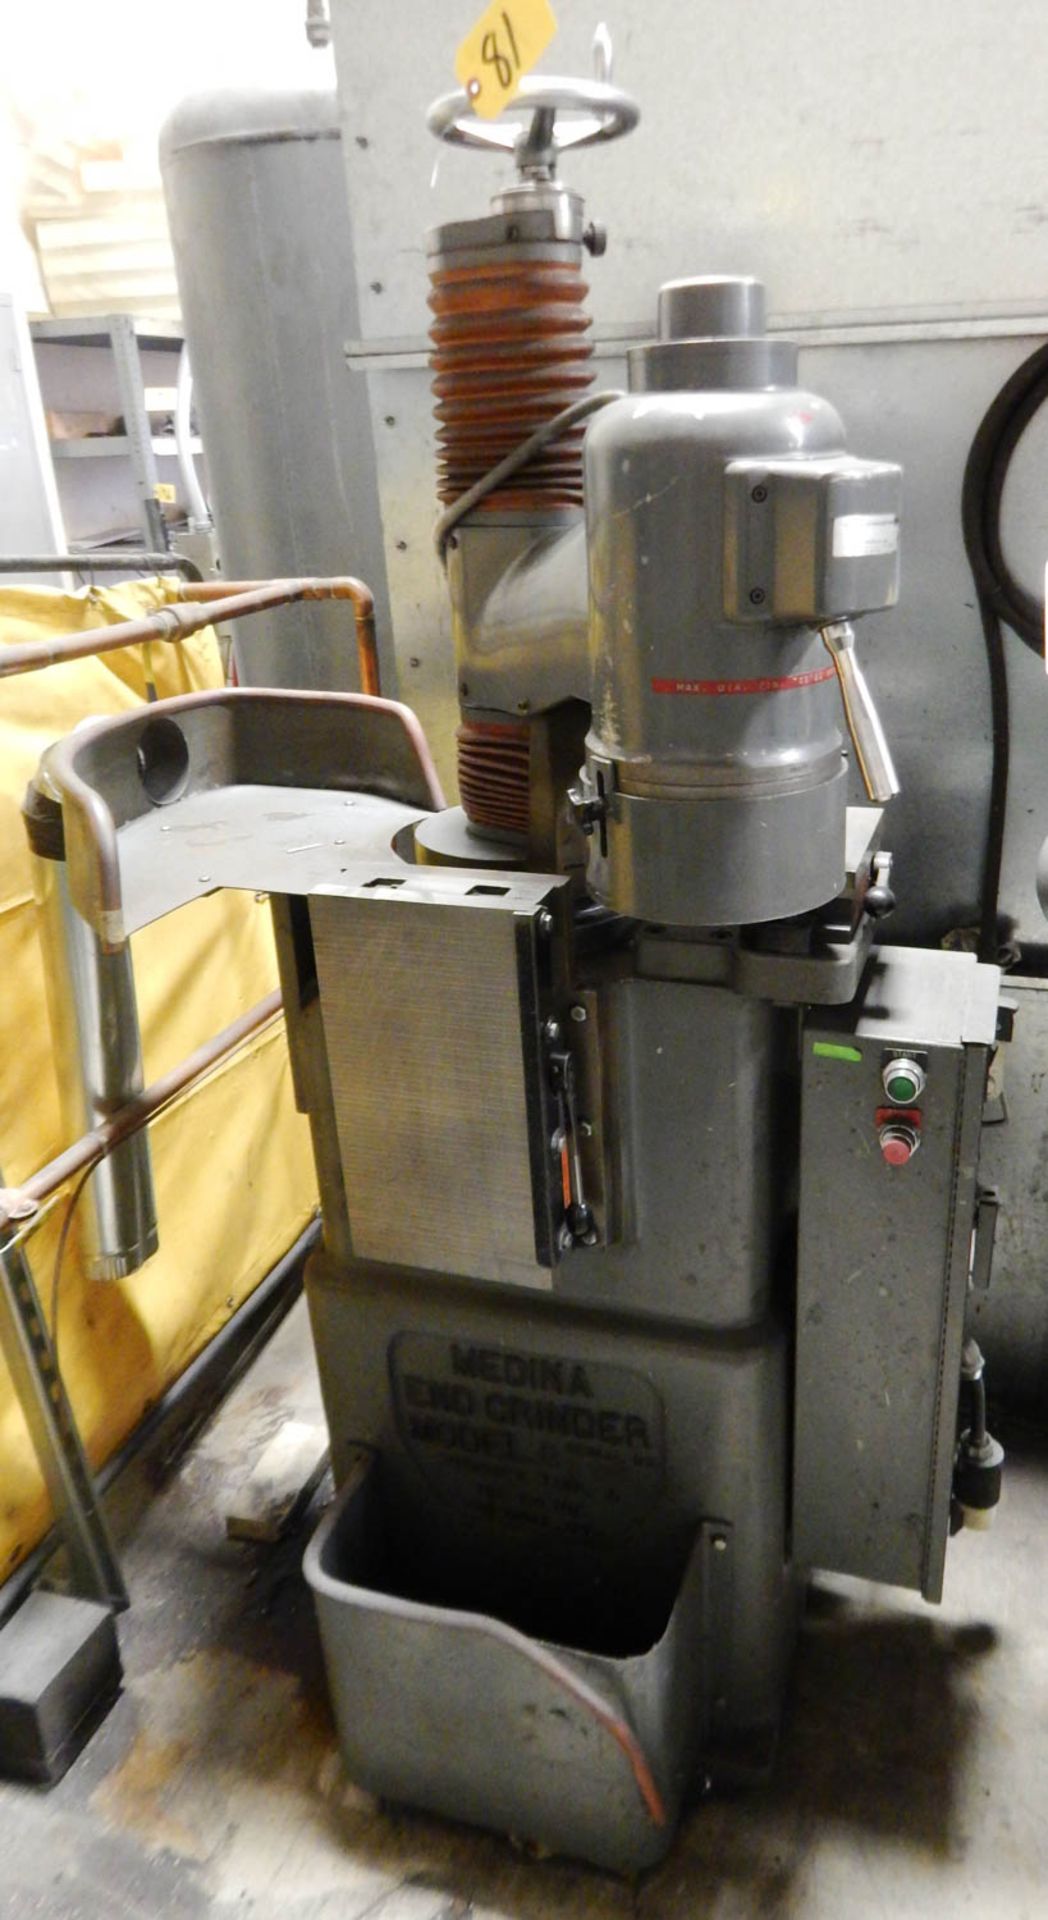 MEDINA END GRINDER MDL B BY PHINNEY TOOL & DIE CO, WITH 8'' X 15'' CERAMAX MAGNETIC CHUCK & 8'' X